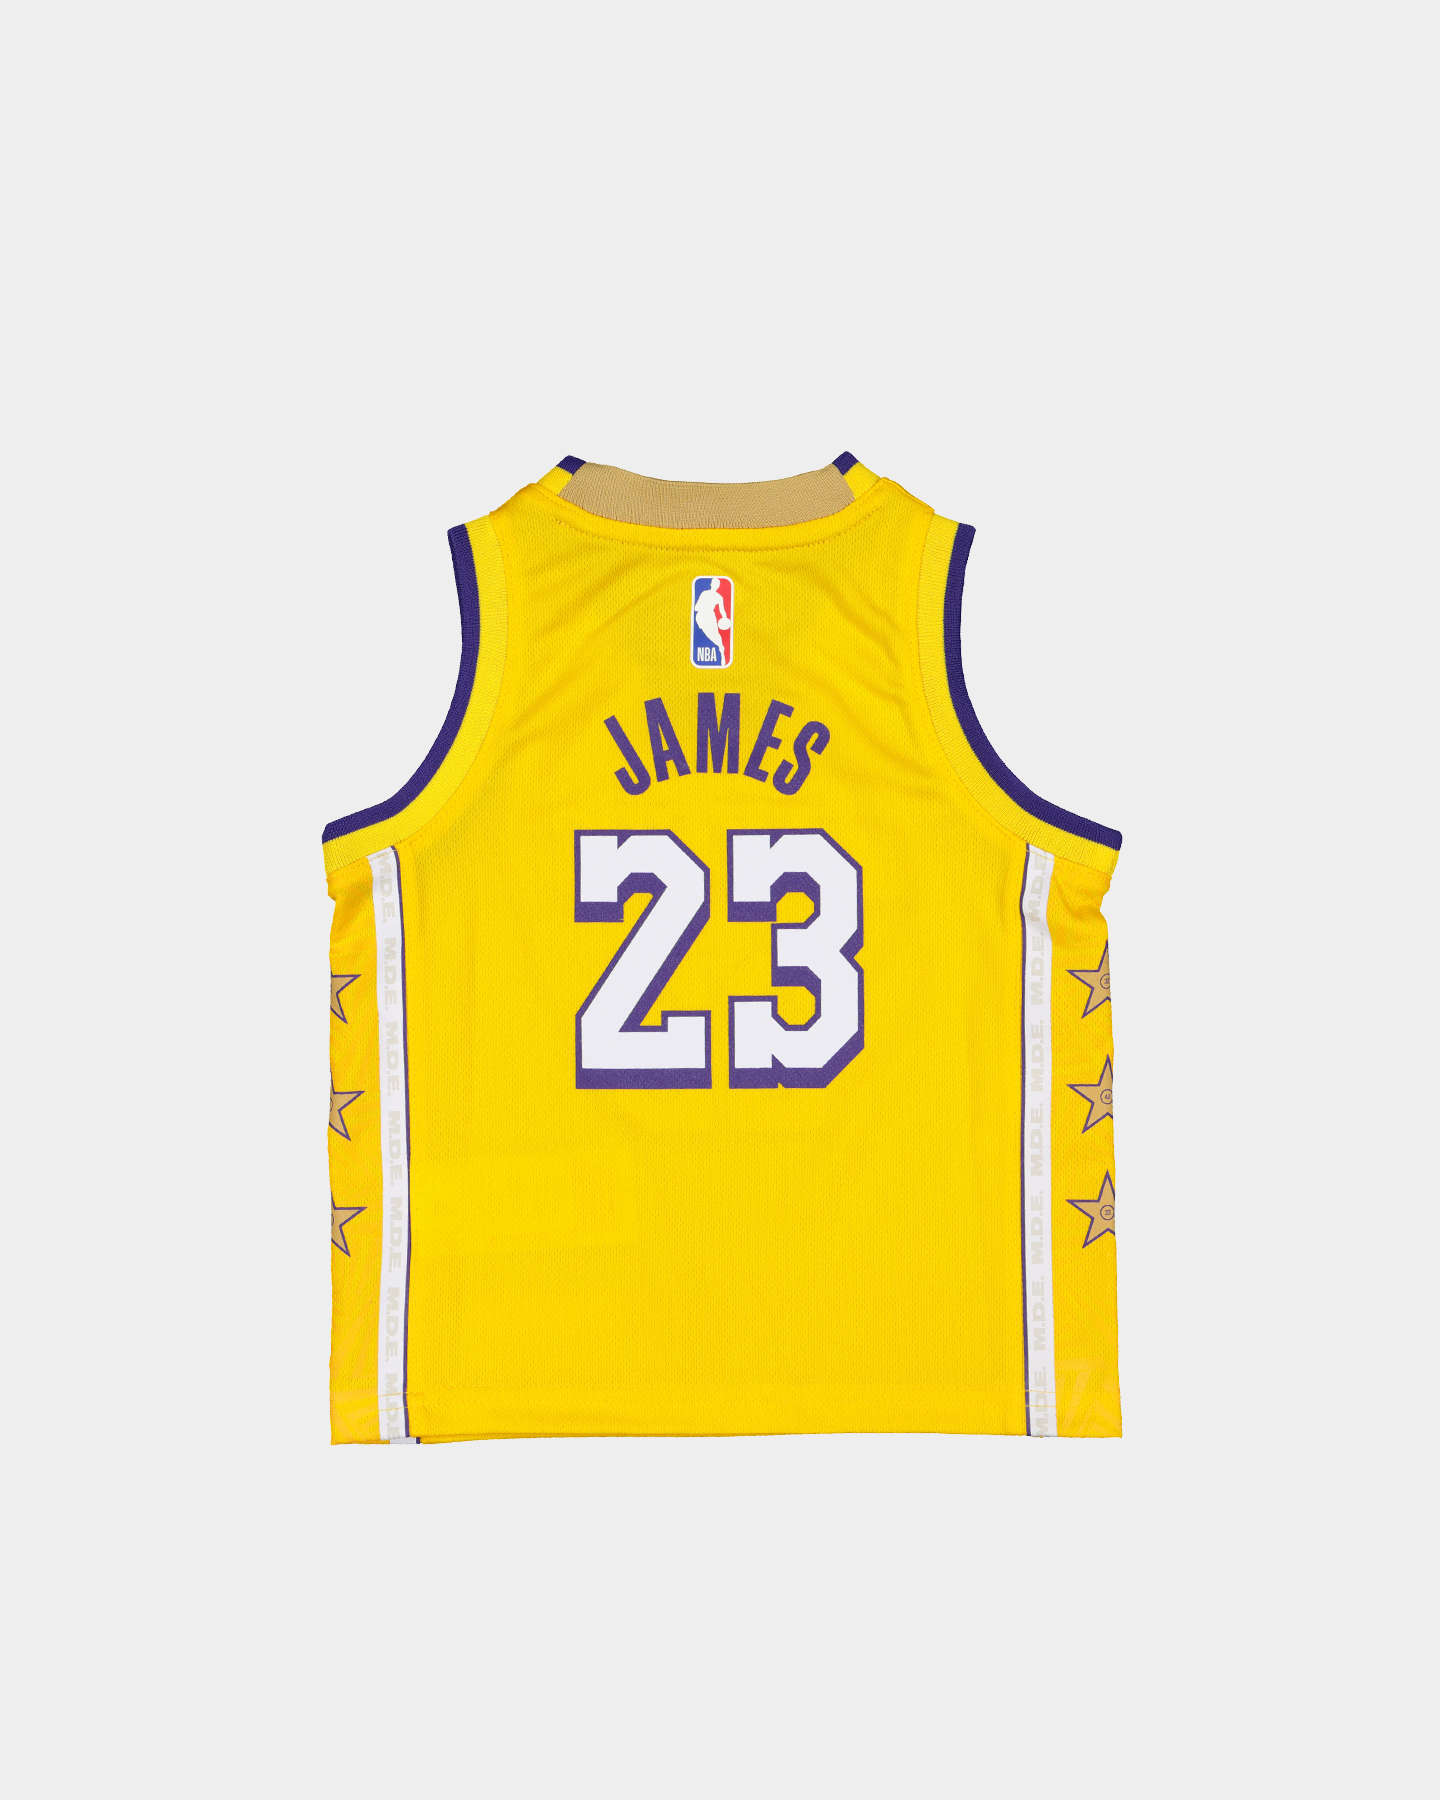 4t lebron james lakers jersey